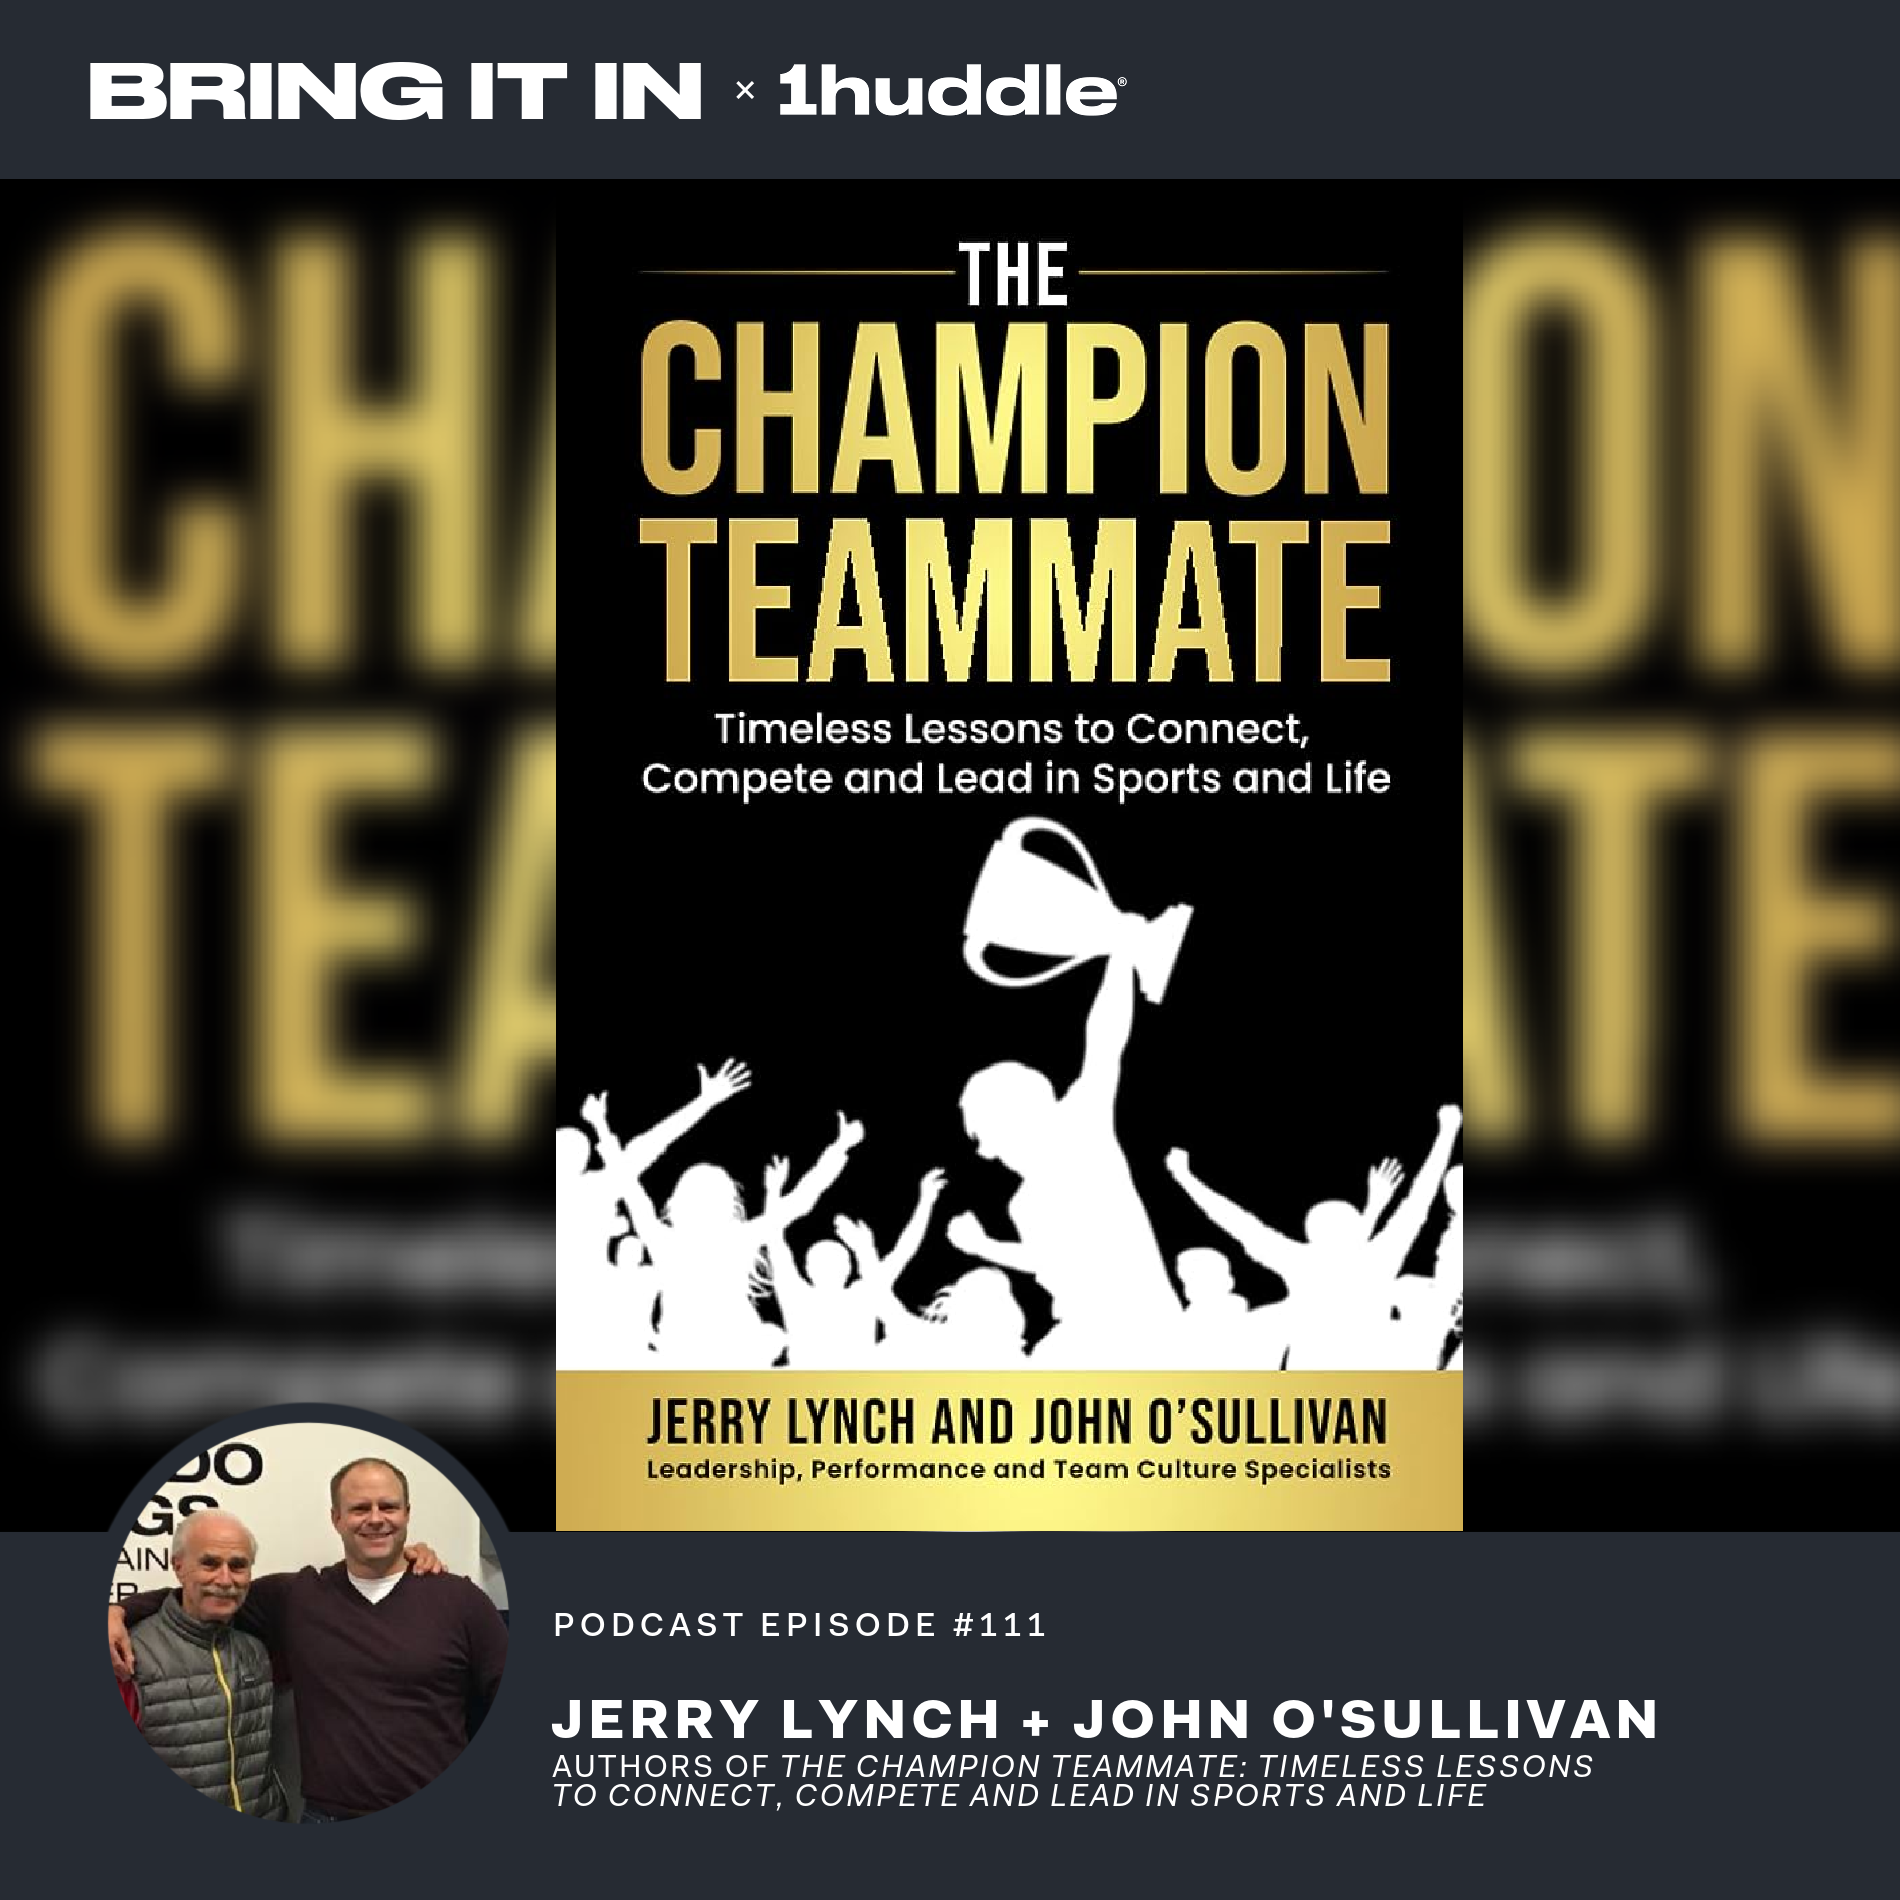 Authors of “The Champion Teammate: Timeless Lessons to Connect, Compete and Lead in Sports and Life”